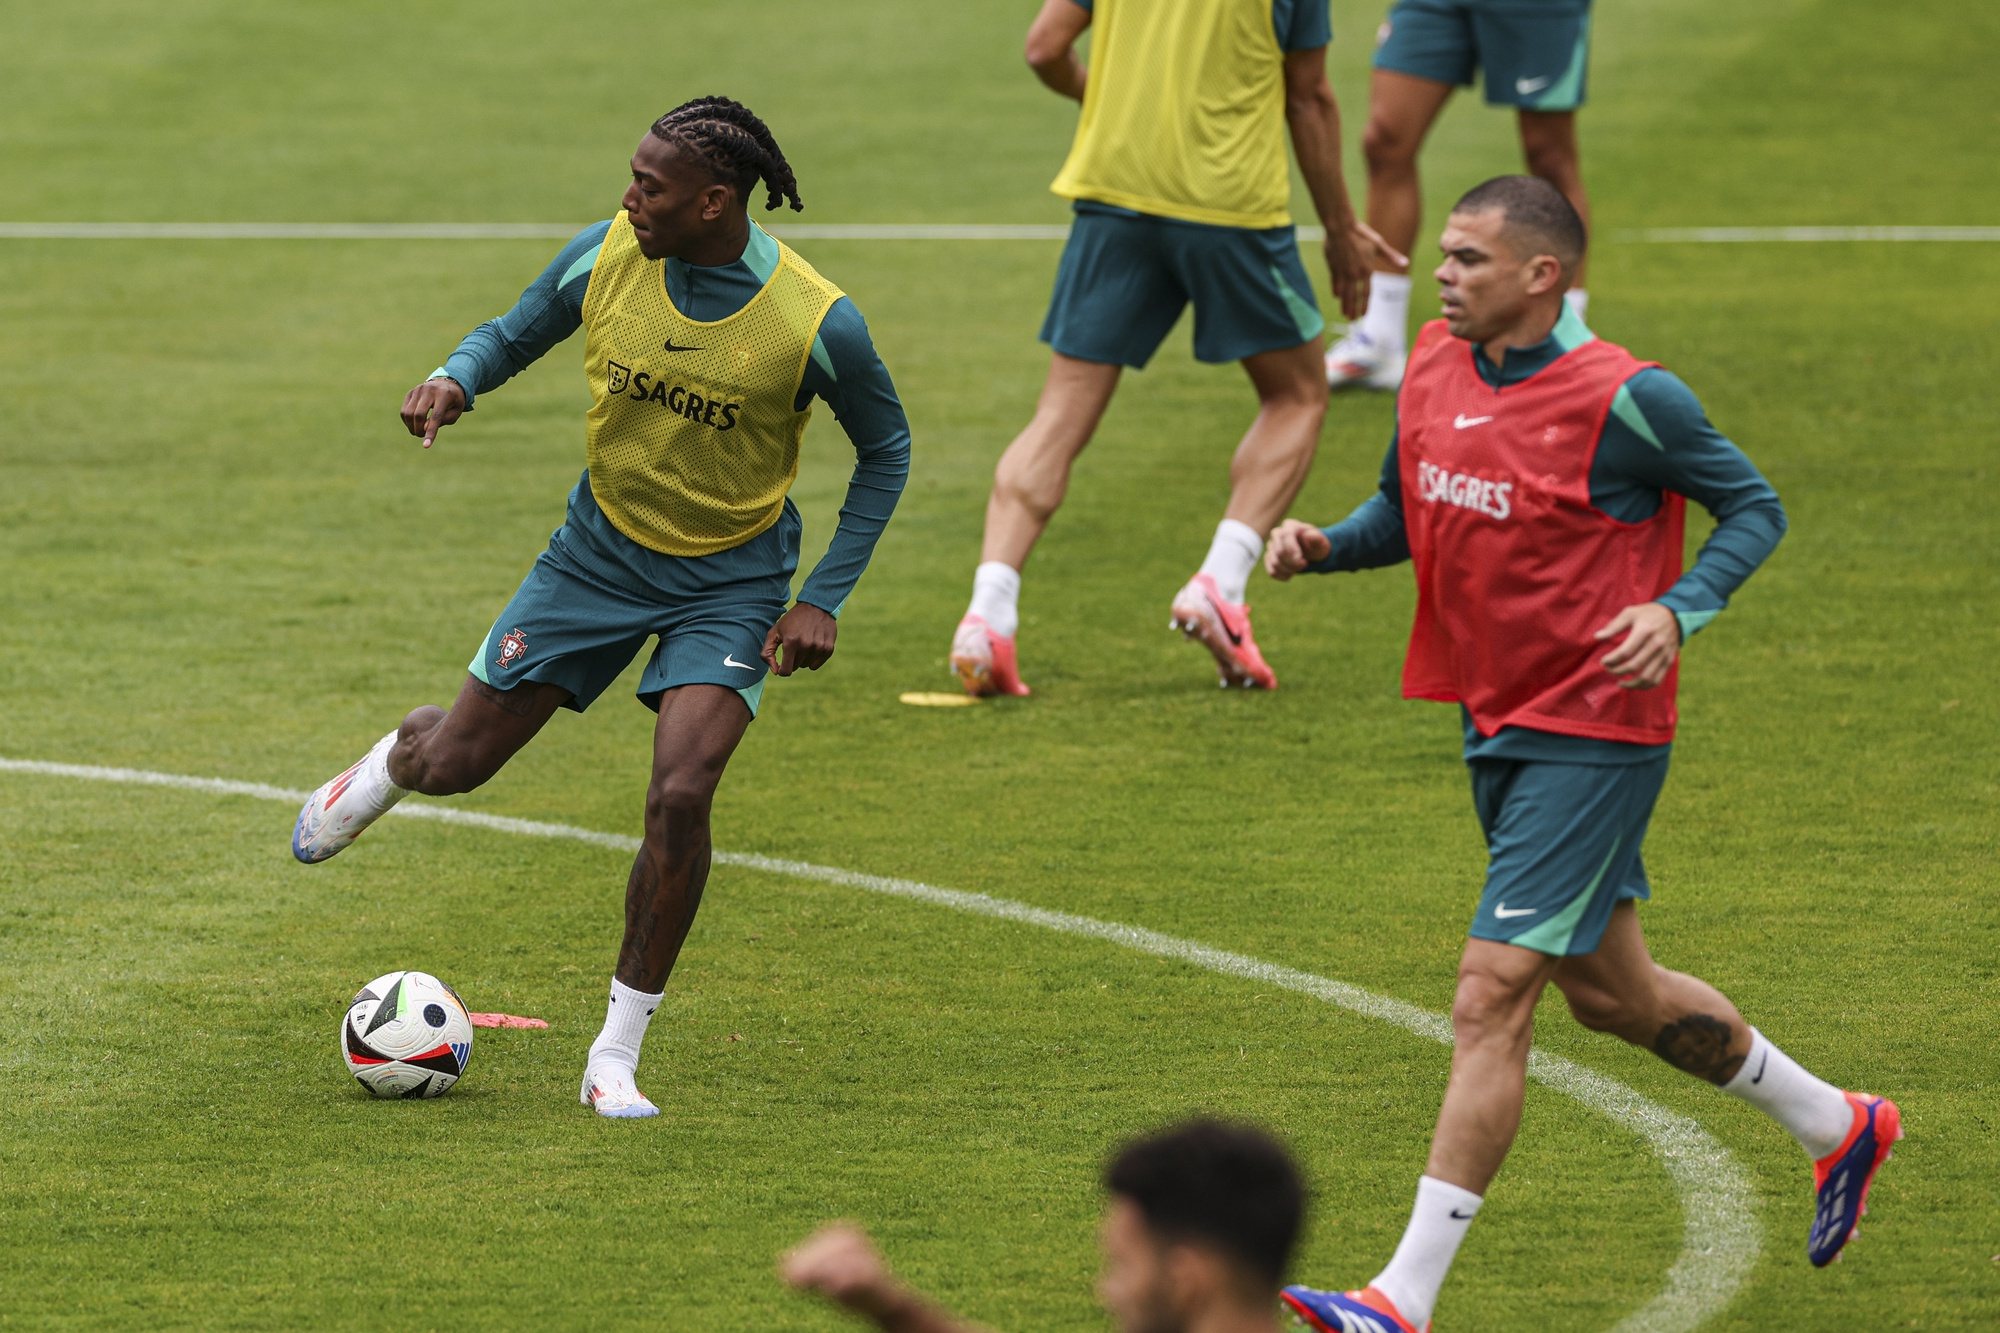 Portugal national soccer team players Rafael Leão (L) and Pepe (R) during a training session open to the public at Heidewaldstadion in Gütersloh, Germany, 14 June 2024. The Portuguese national soccer team is based in Marienfeld, Harsewinkel during the UEFA EURO 2024. MIGUEL A. LOPES/LUSA